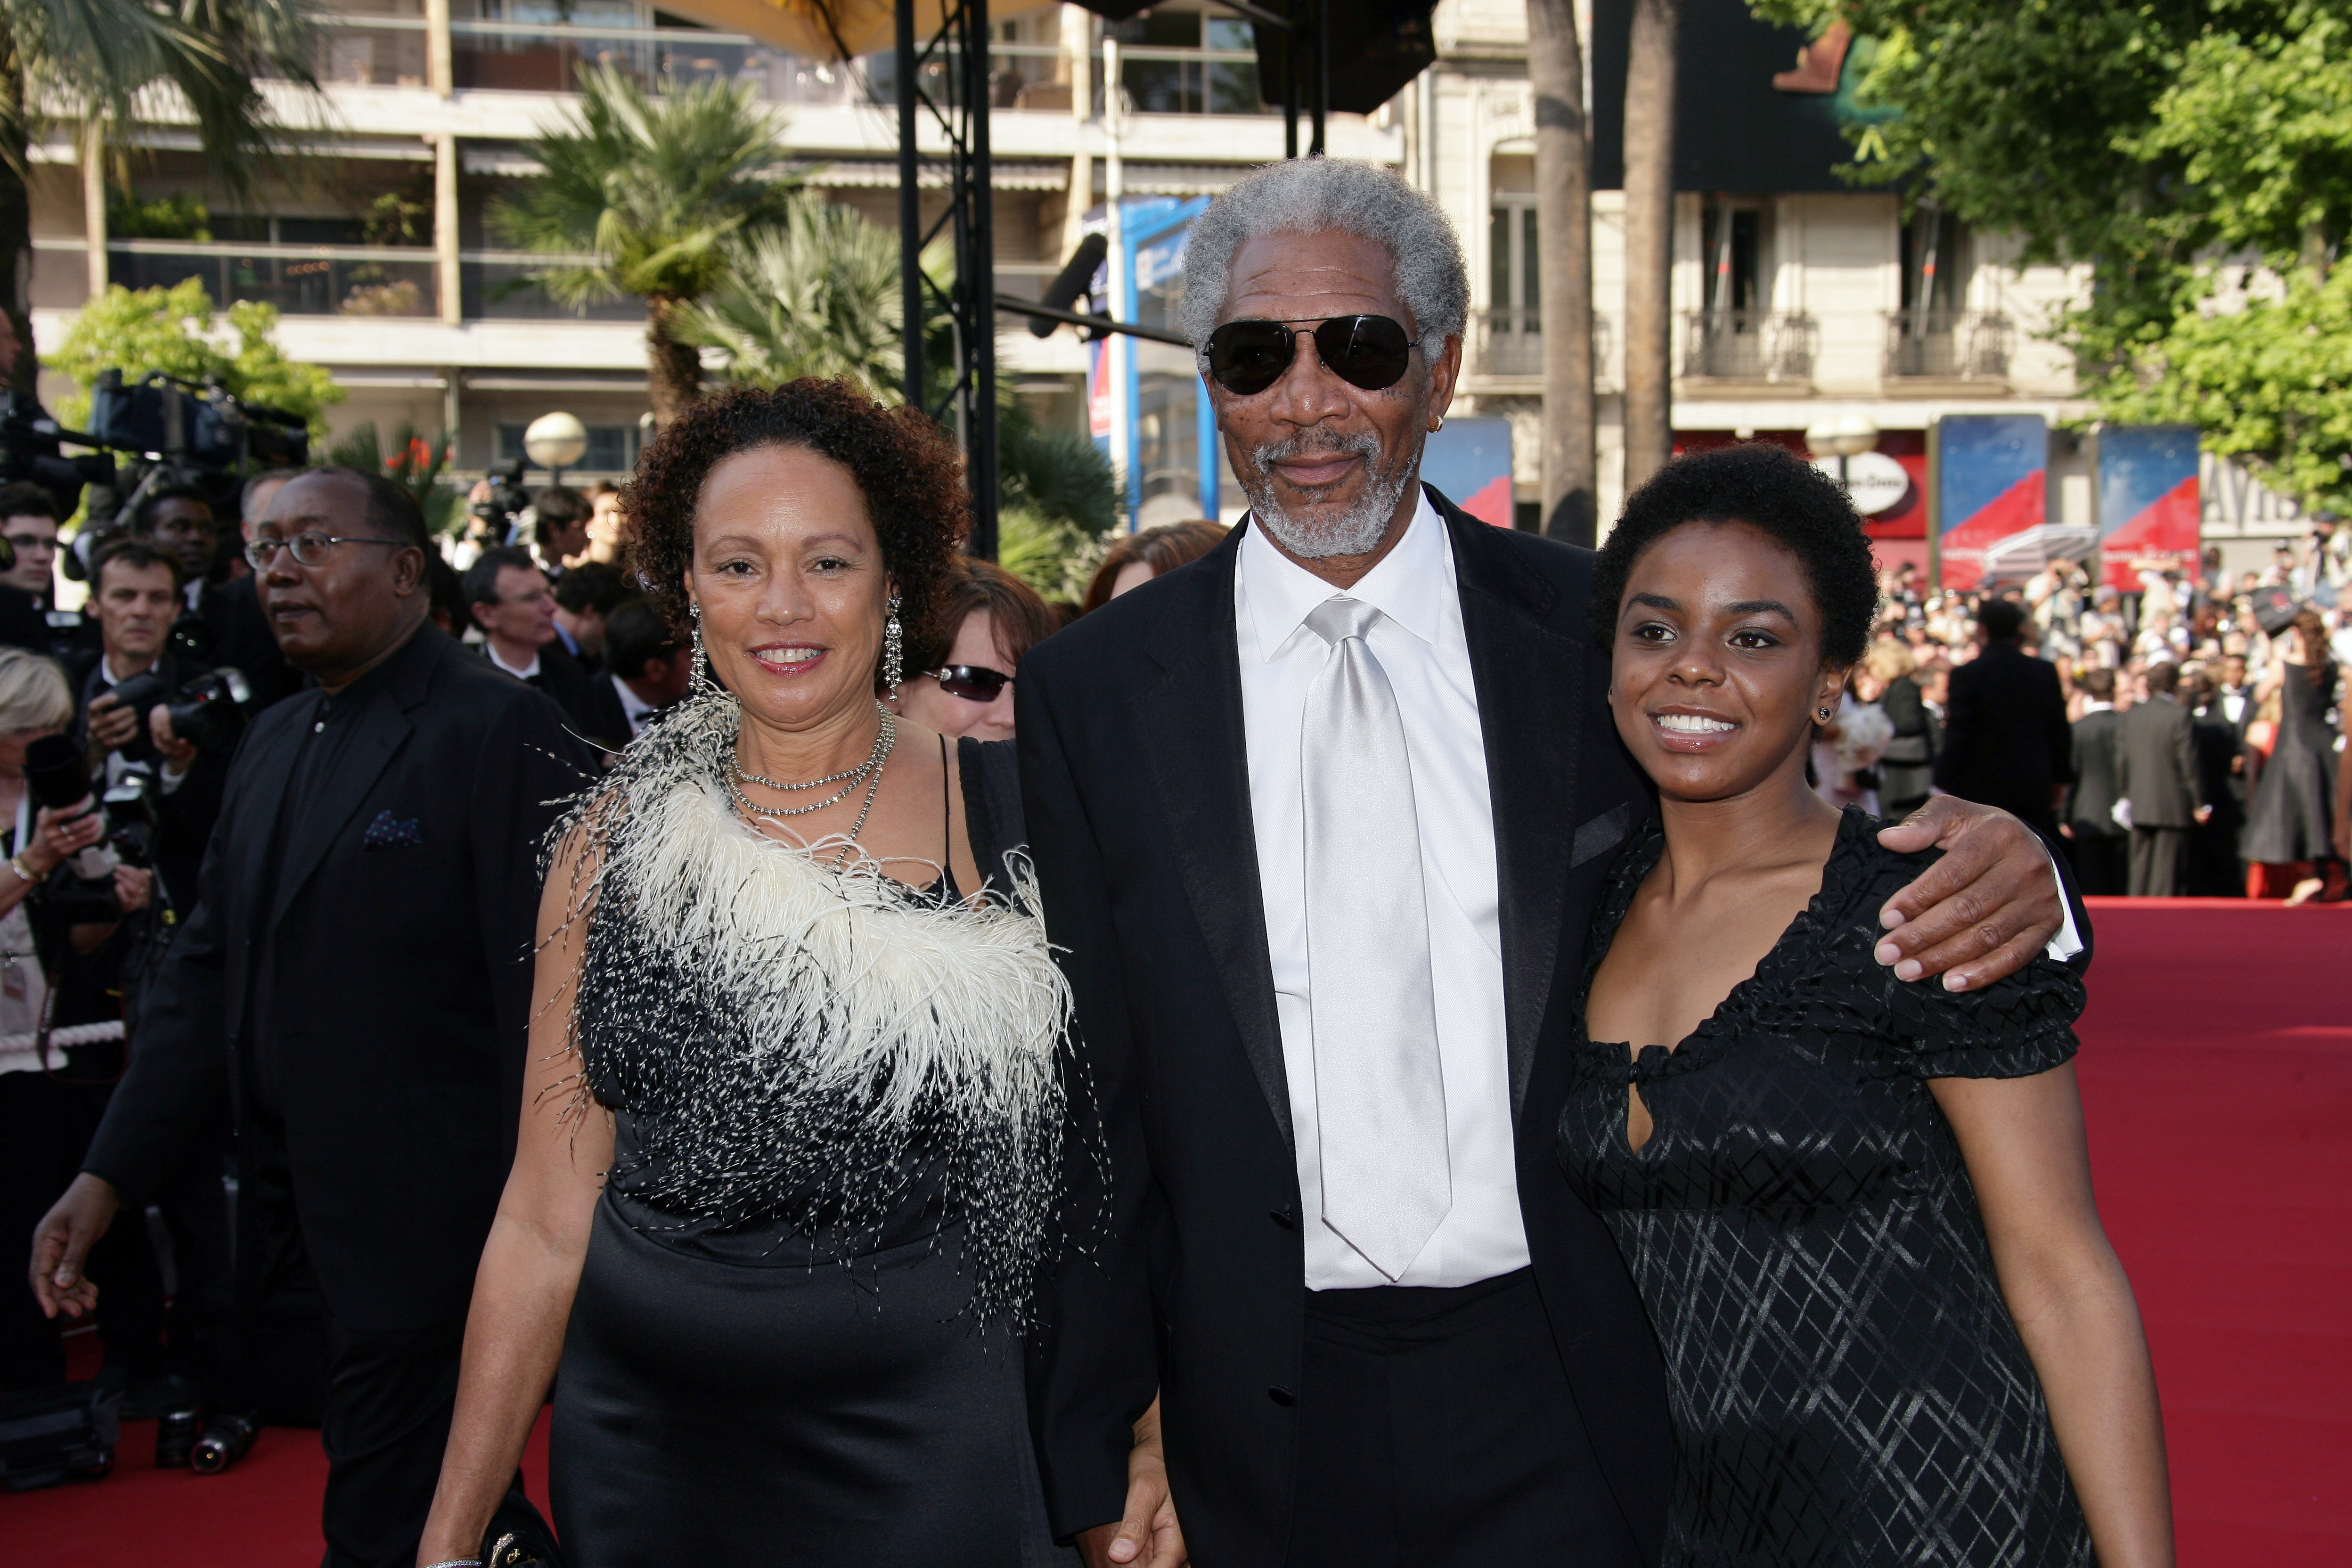 Morgan Freeman and his family at the Cannes Festival in 2005 | Source: Getty Images